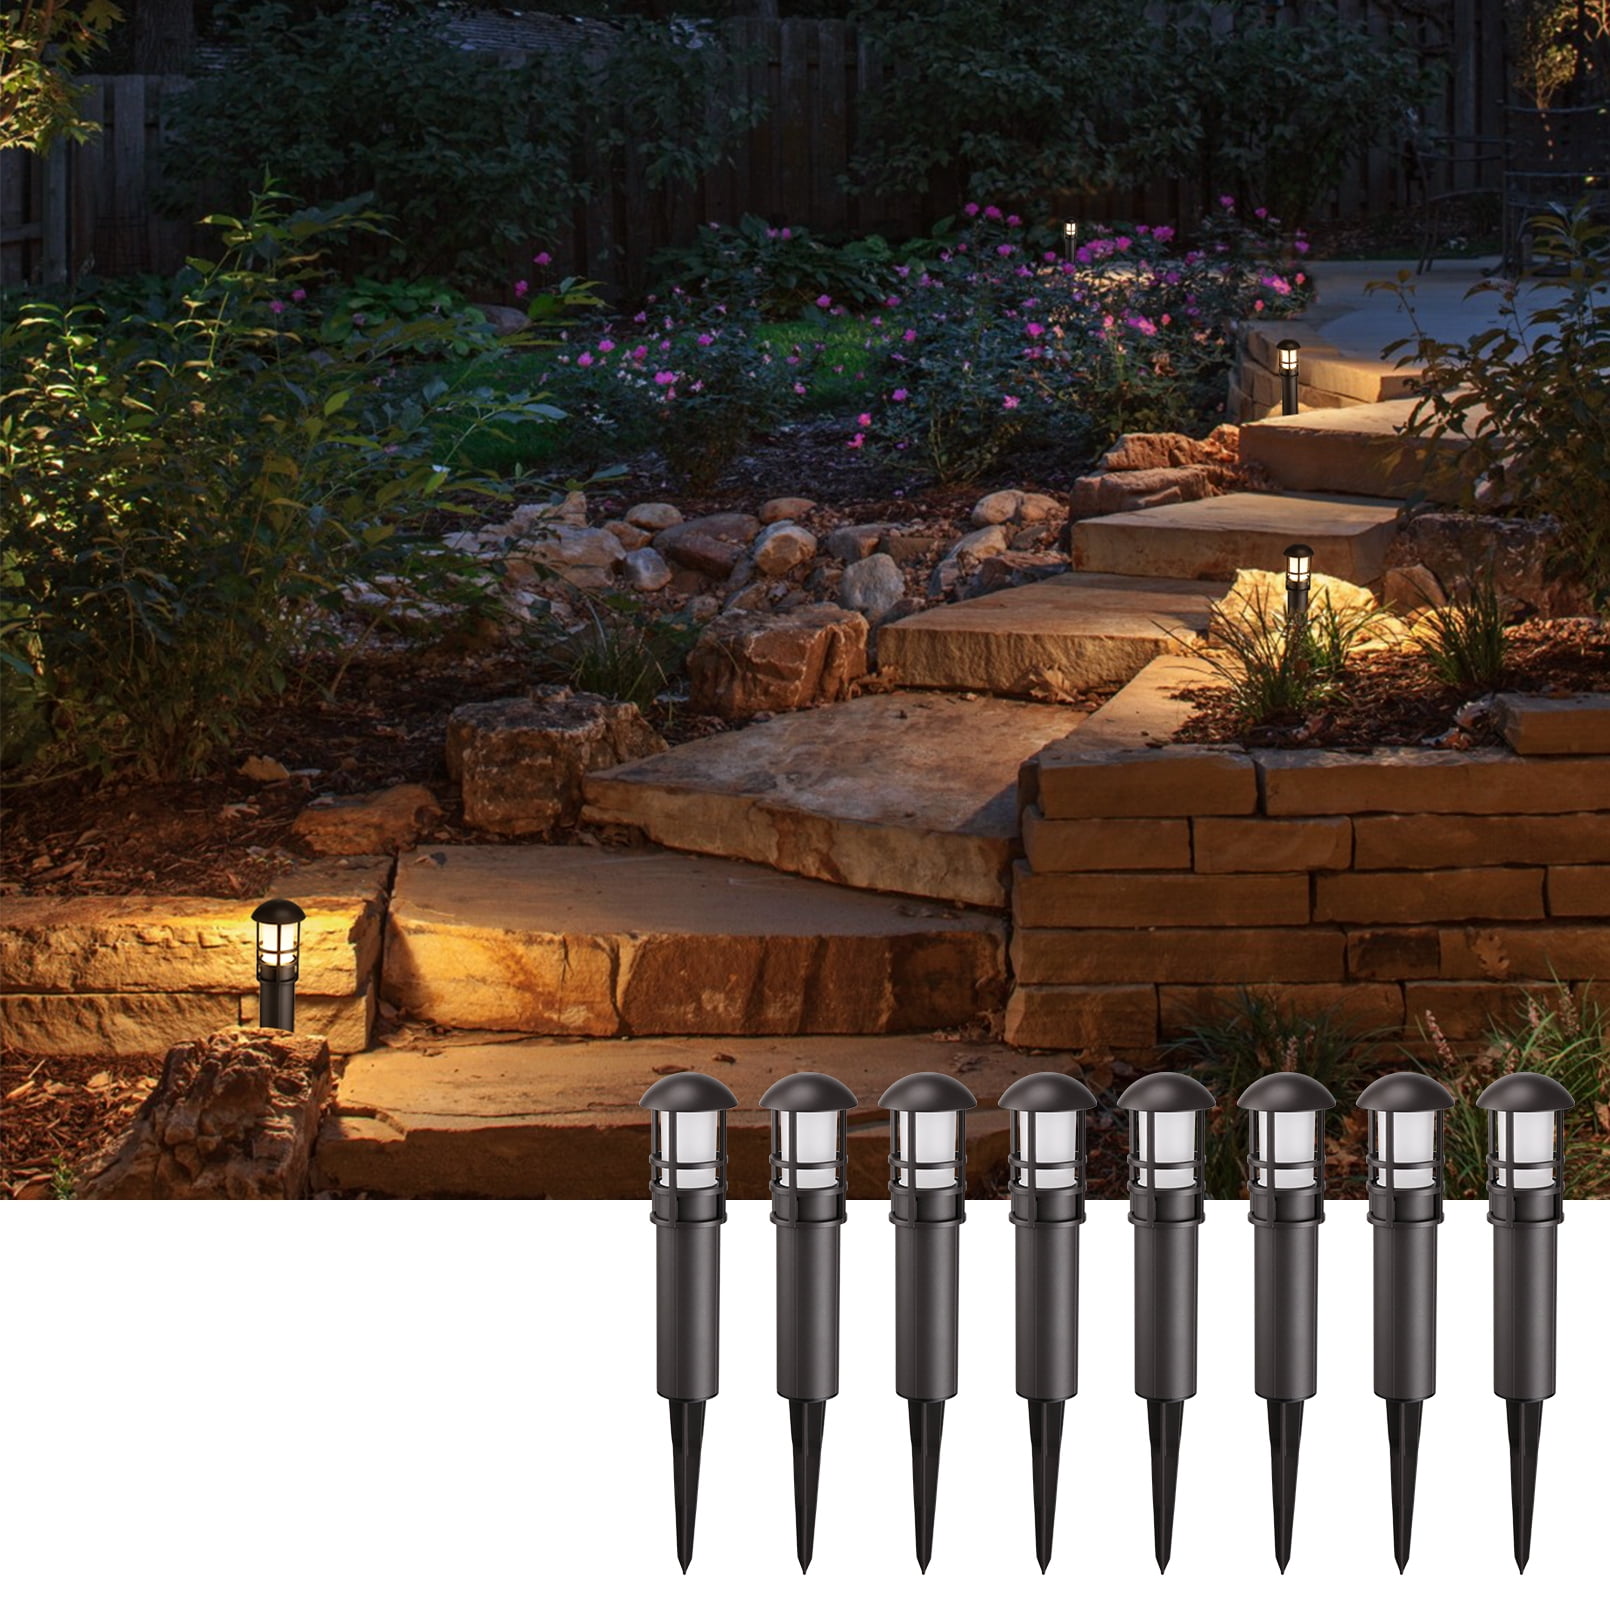 Details about   Solar Power Flower Garden Stake Landscape Fairy Lamp Outdoor Yard Path LED Light 